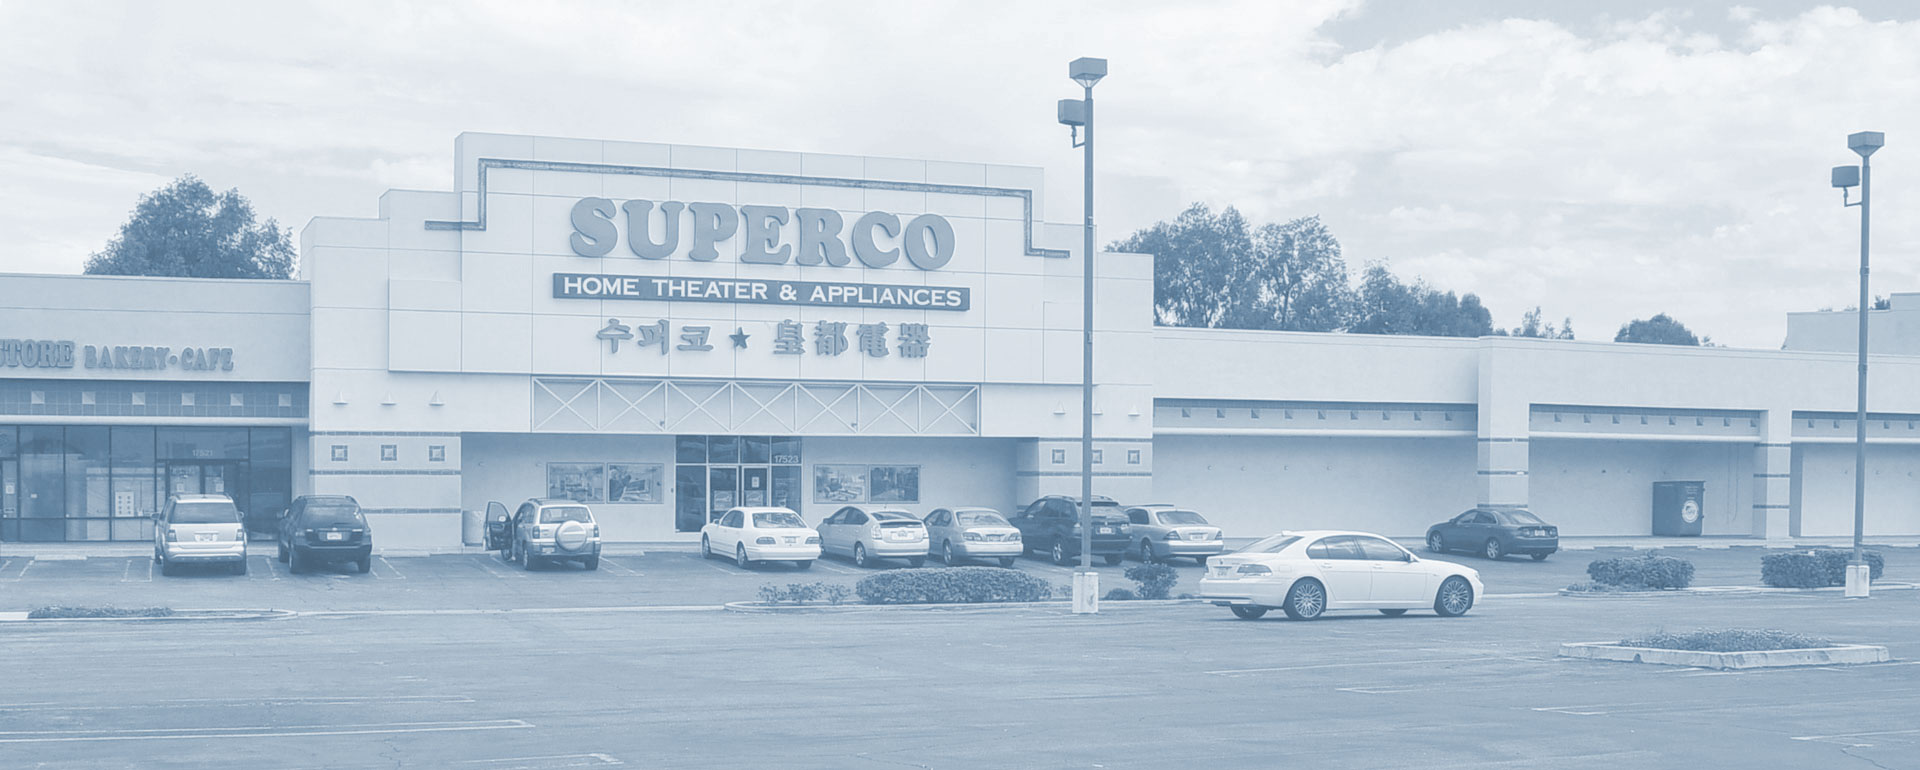 Superco - City of Industry